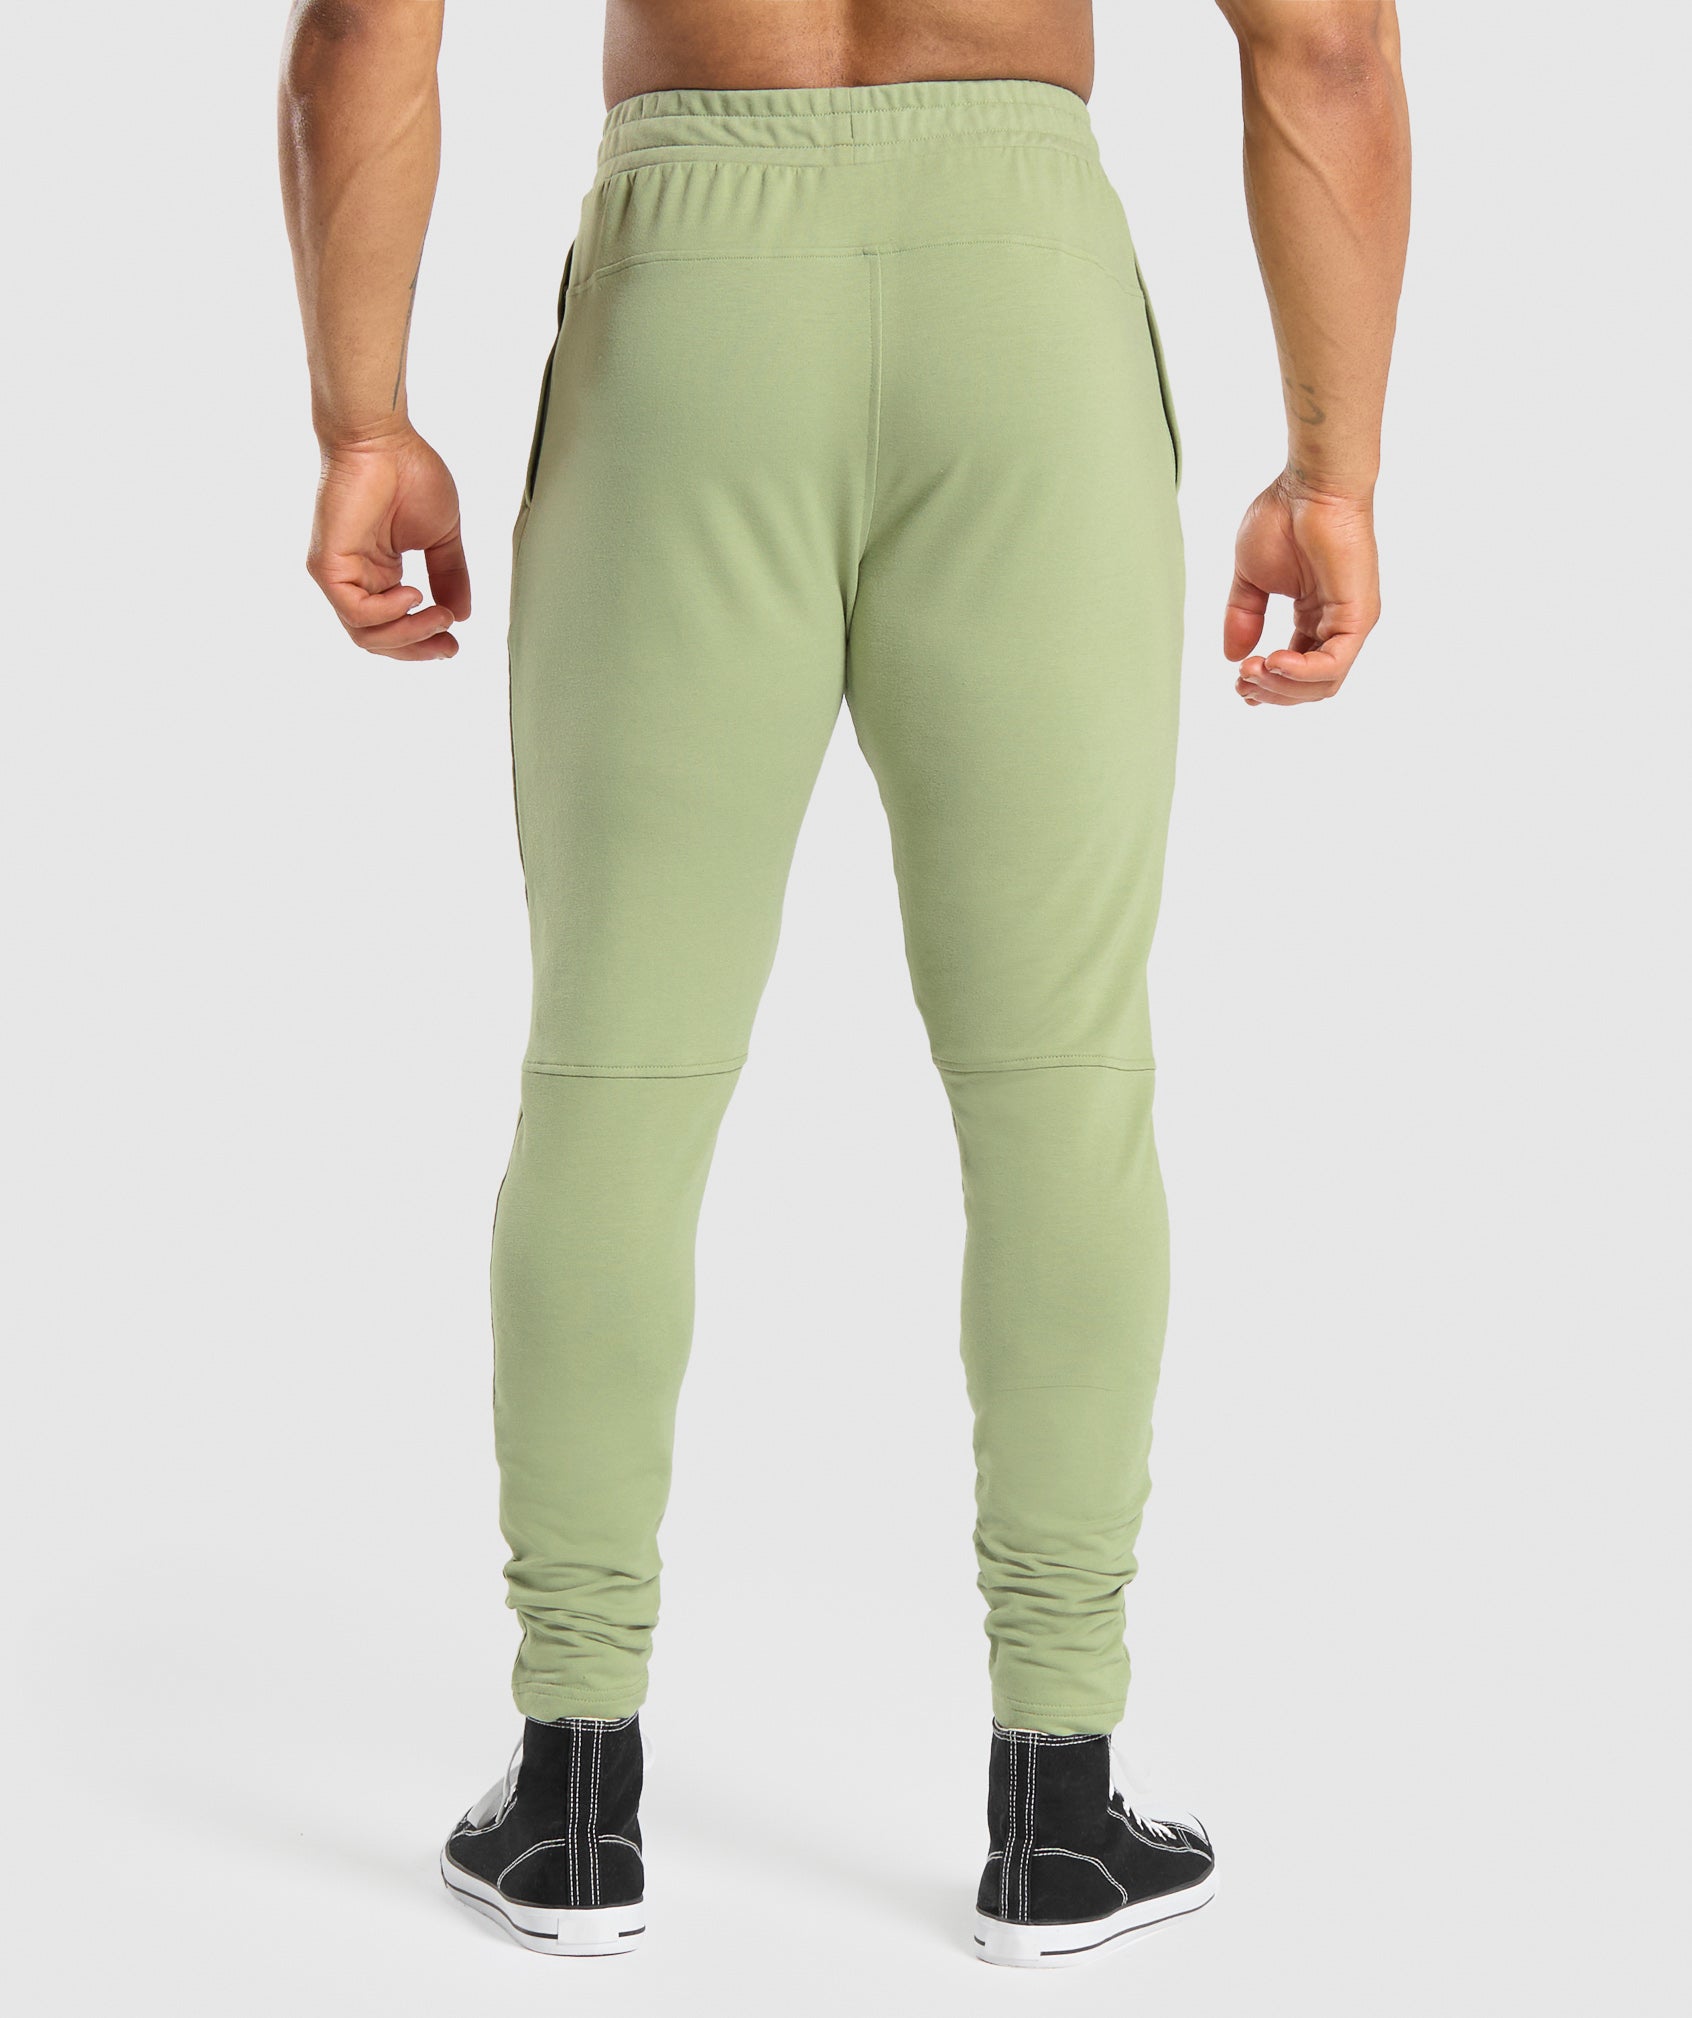 Essential Muscle Joggers in Natural Sage Green - view 2